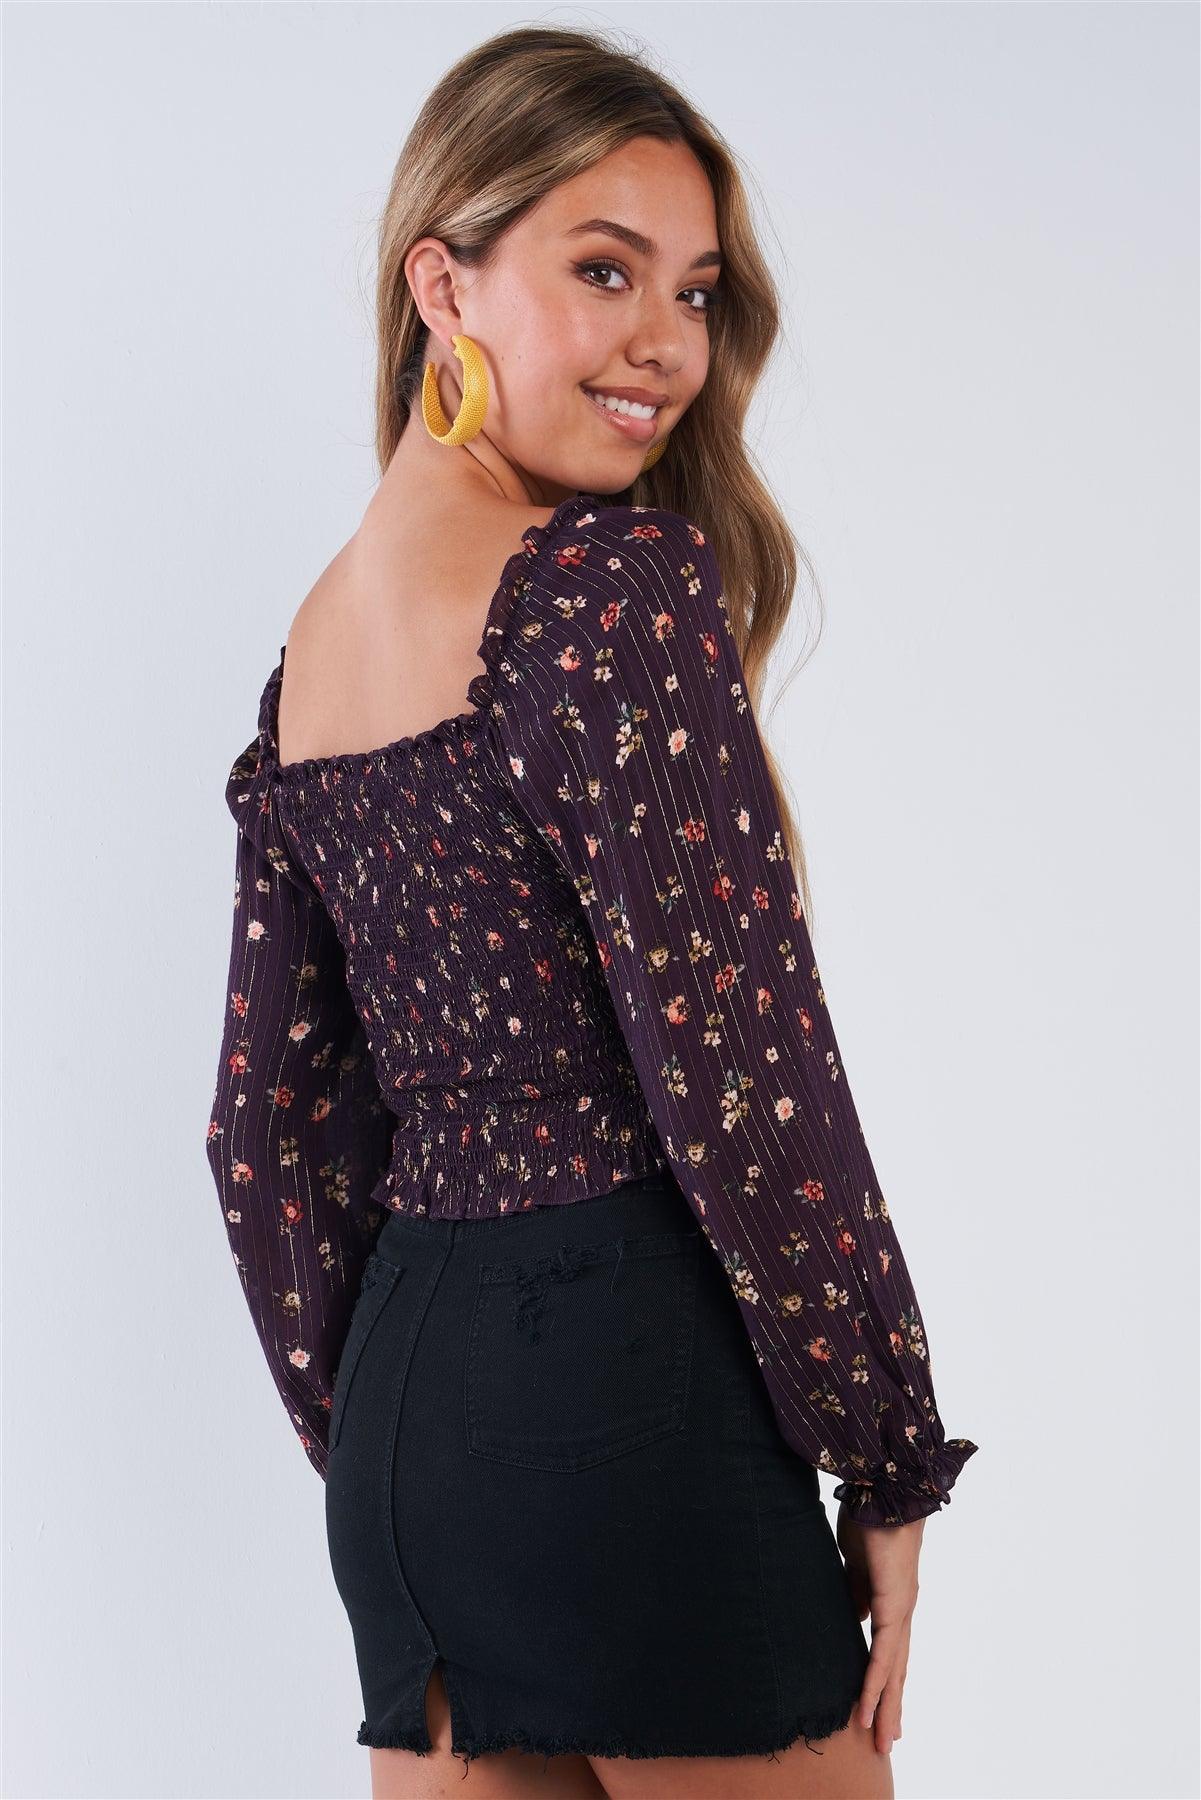 Plum Purple Long Sleeve Square Neck Gold Pin Stripped Floral Print Crop Top